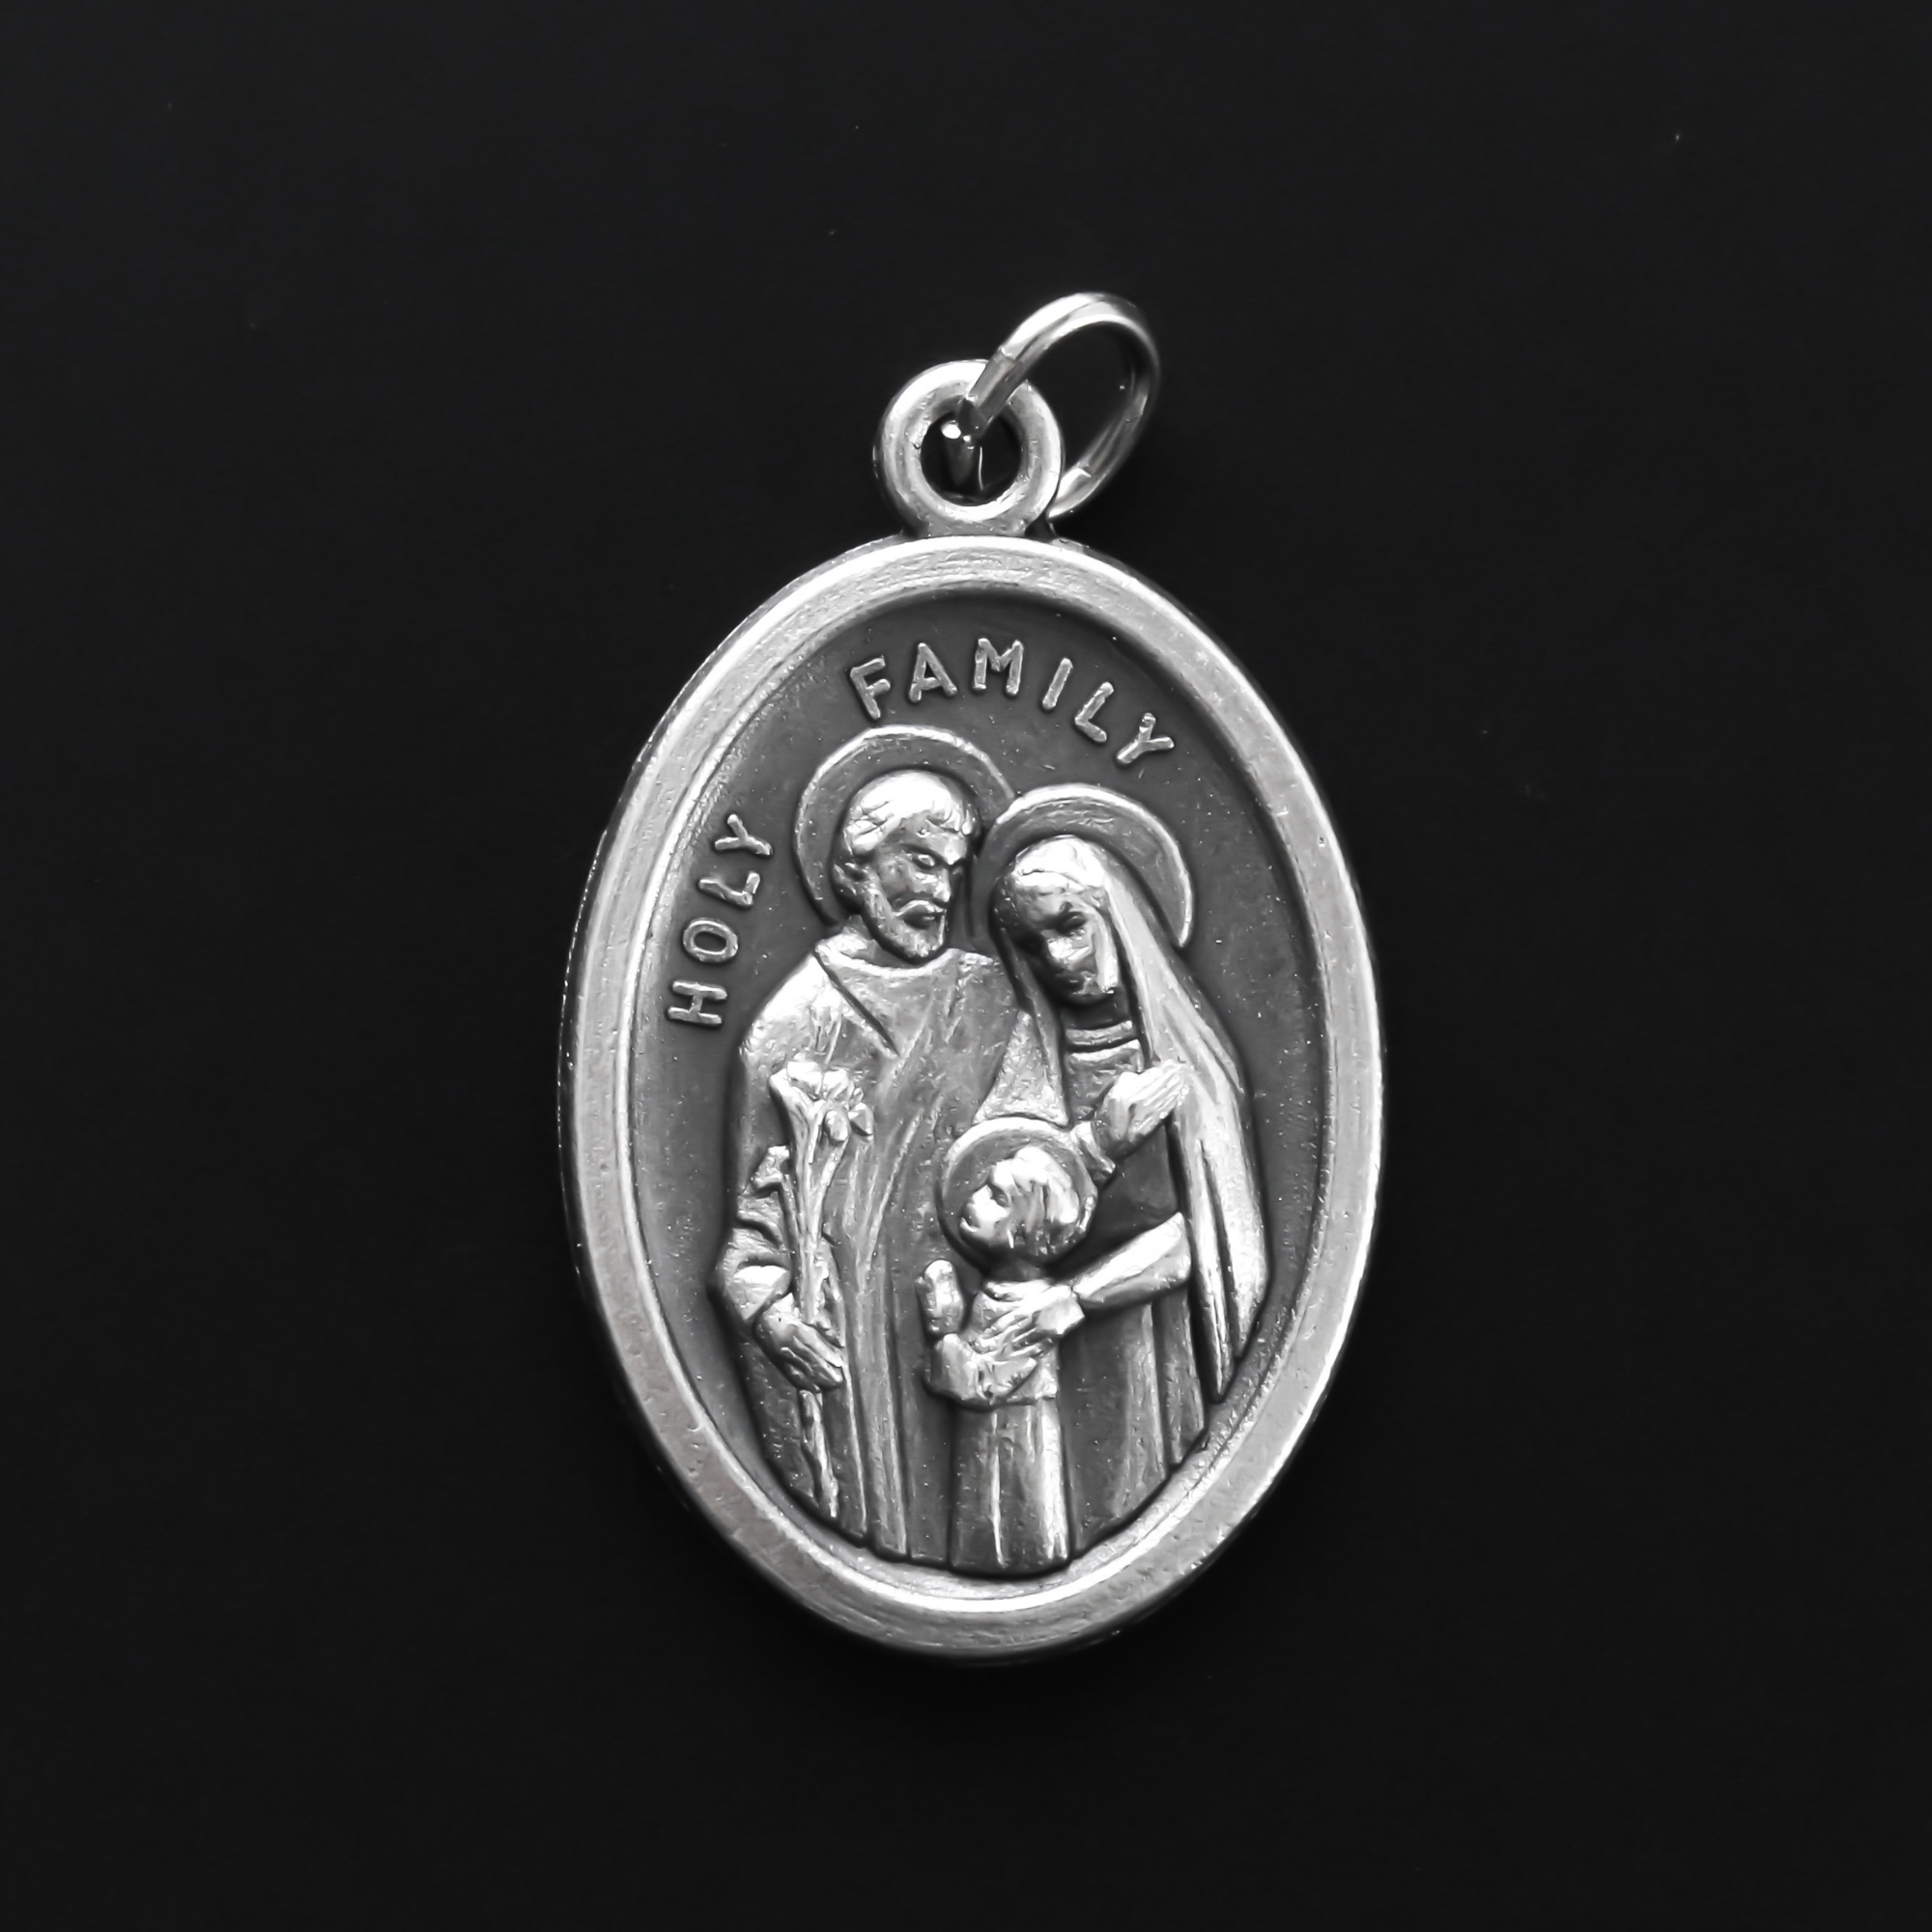 Holy family medal. The front of the medal depicts the child Jesus, Joseph, and Mary. The reverse side of the medal depicts the Holy Spirit.